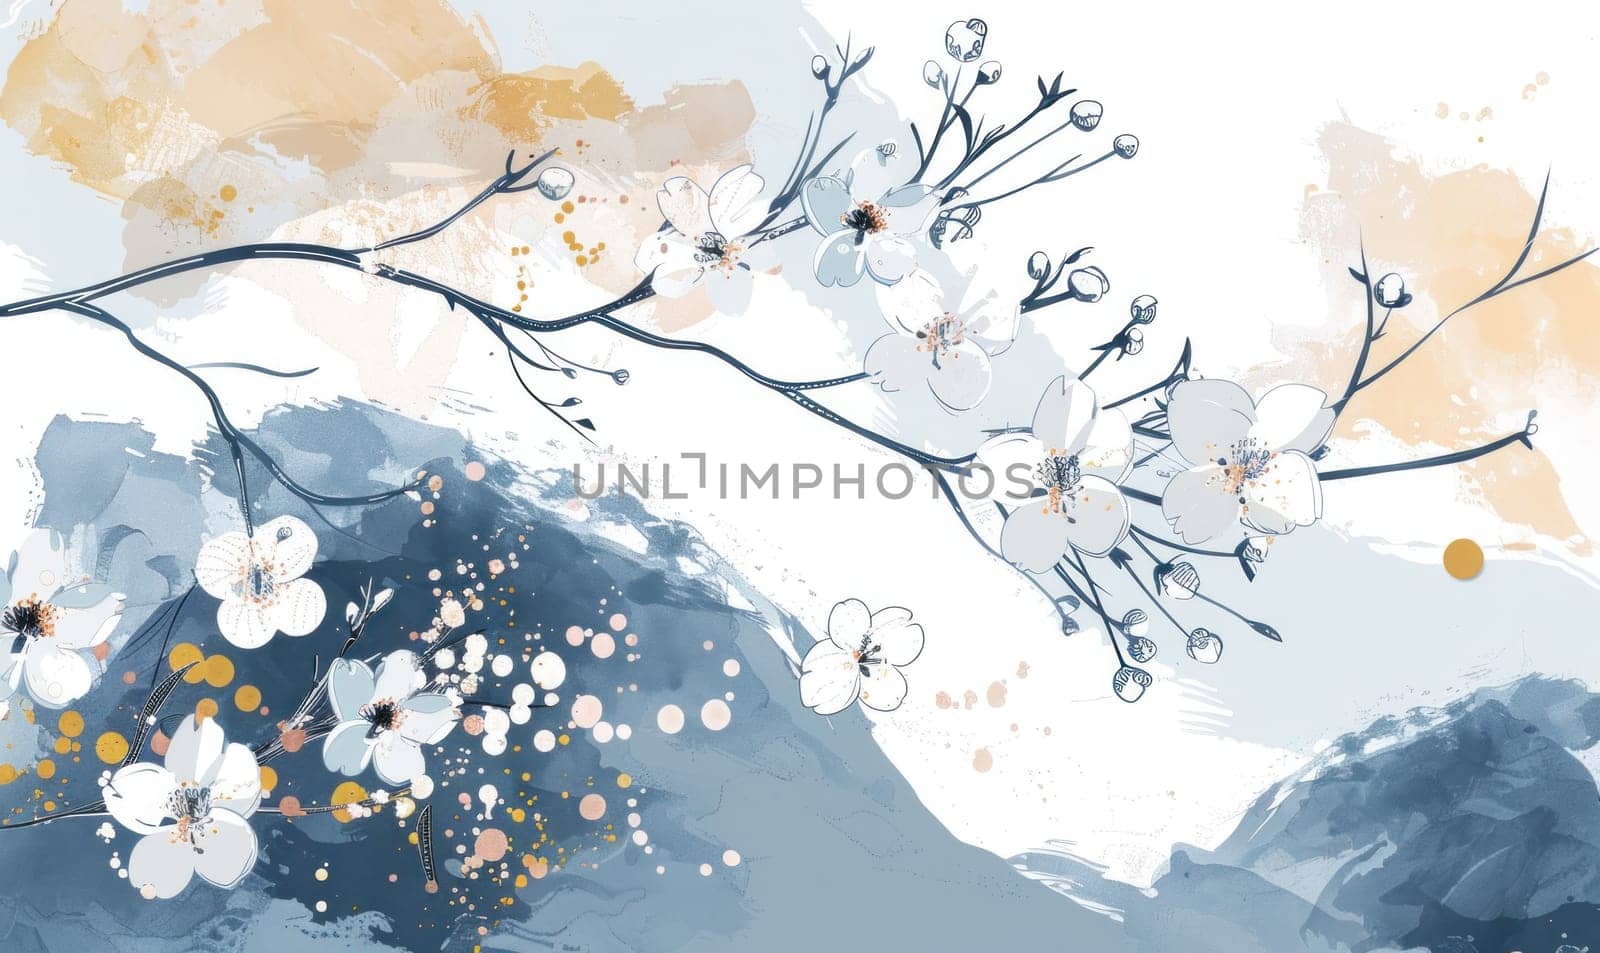 Flowers on branches with blue sky and mountains in background, nature's beauty and tranquility in artistic painting